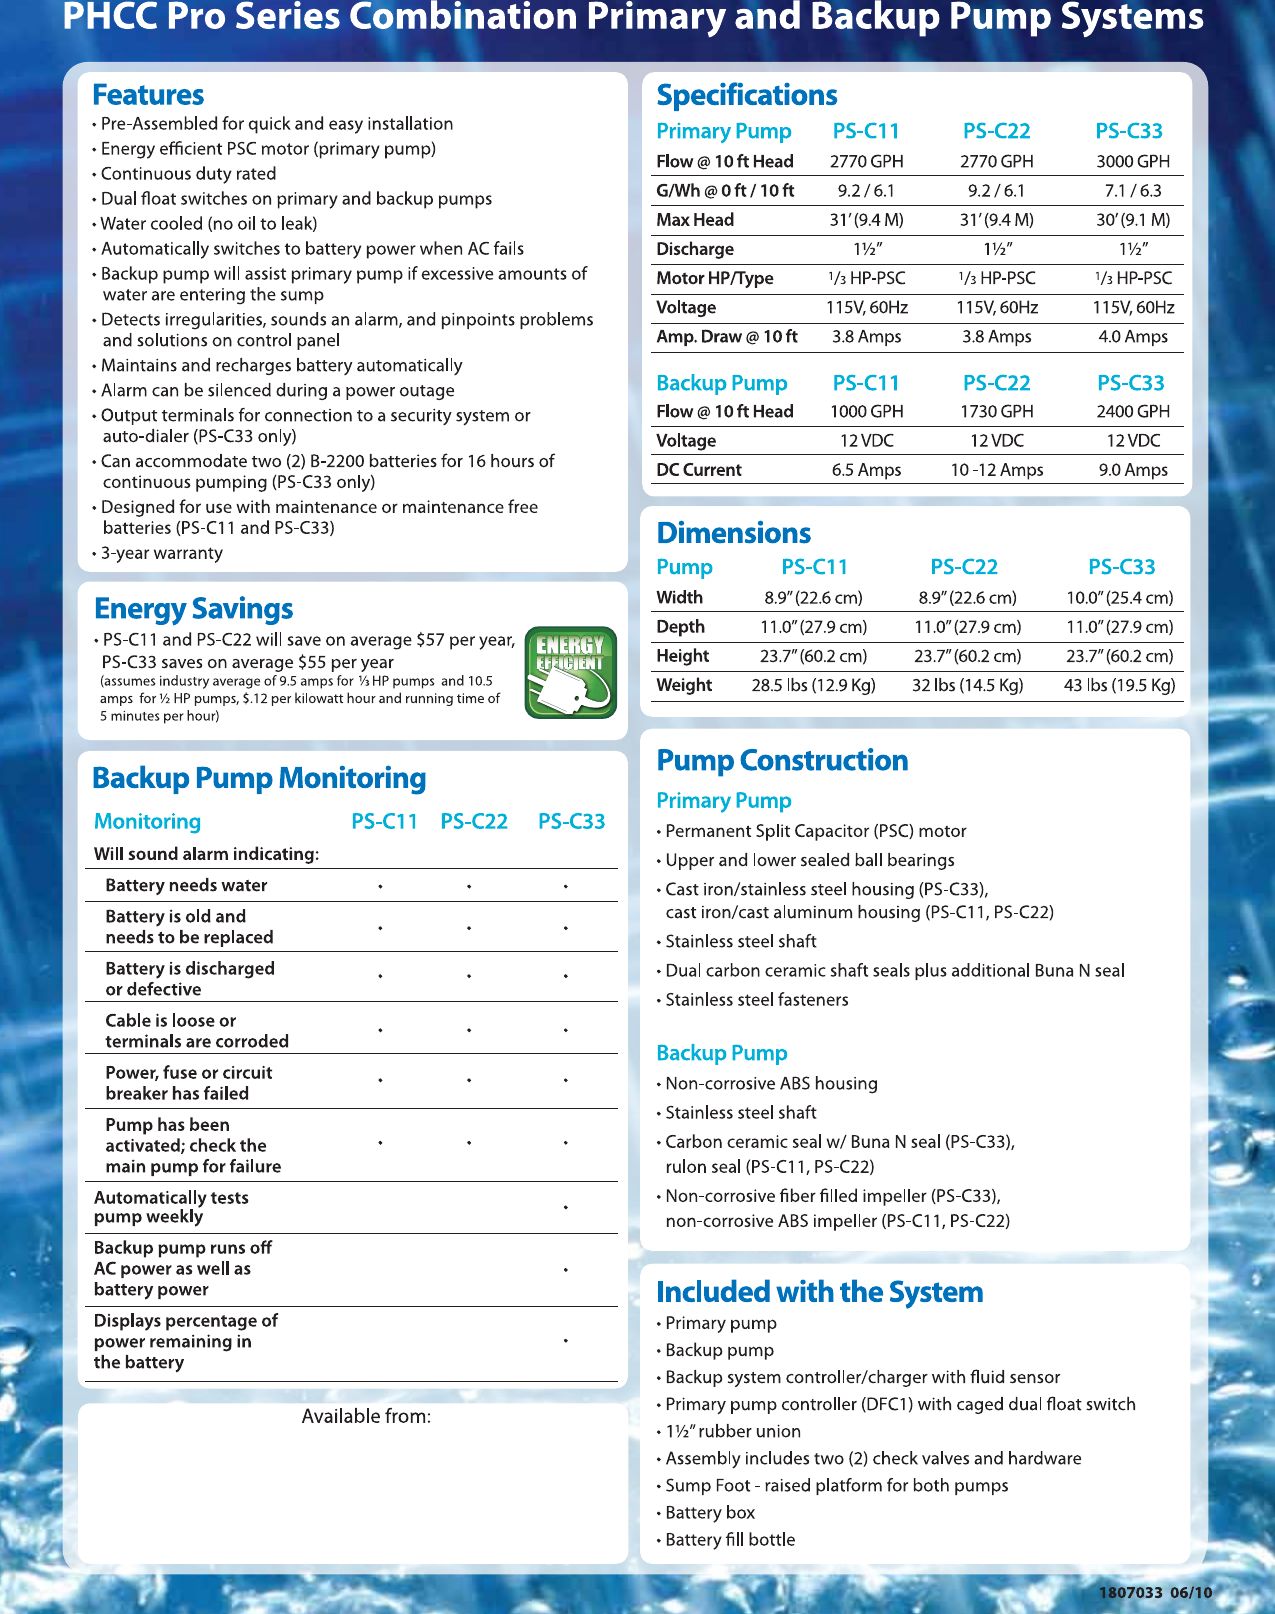 Page 2 of 2 - 10 1 Pro Series Ps-C11 Brochure 1807033 Front Lo User Manual